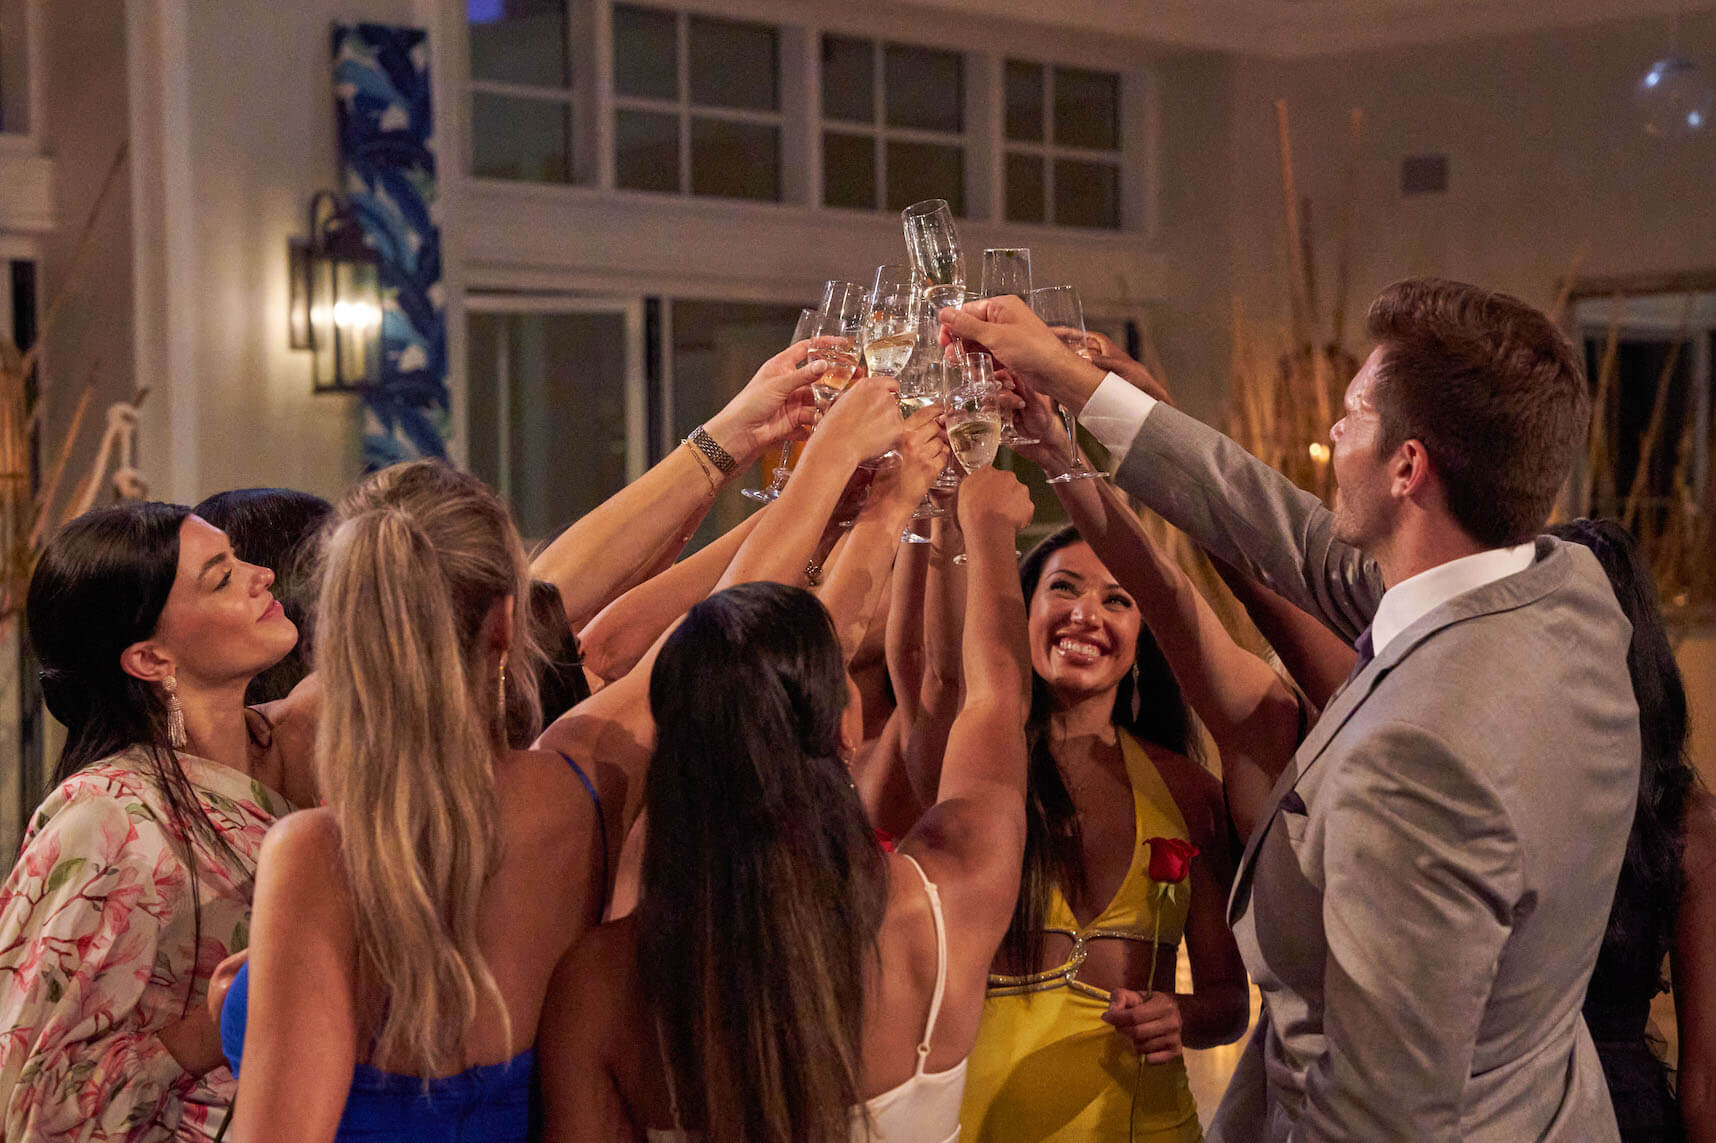 'The Bachelor' Season 27 cast raising their glasses up and toasting with Zach Shallcross